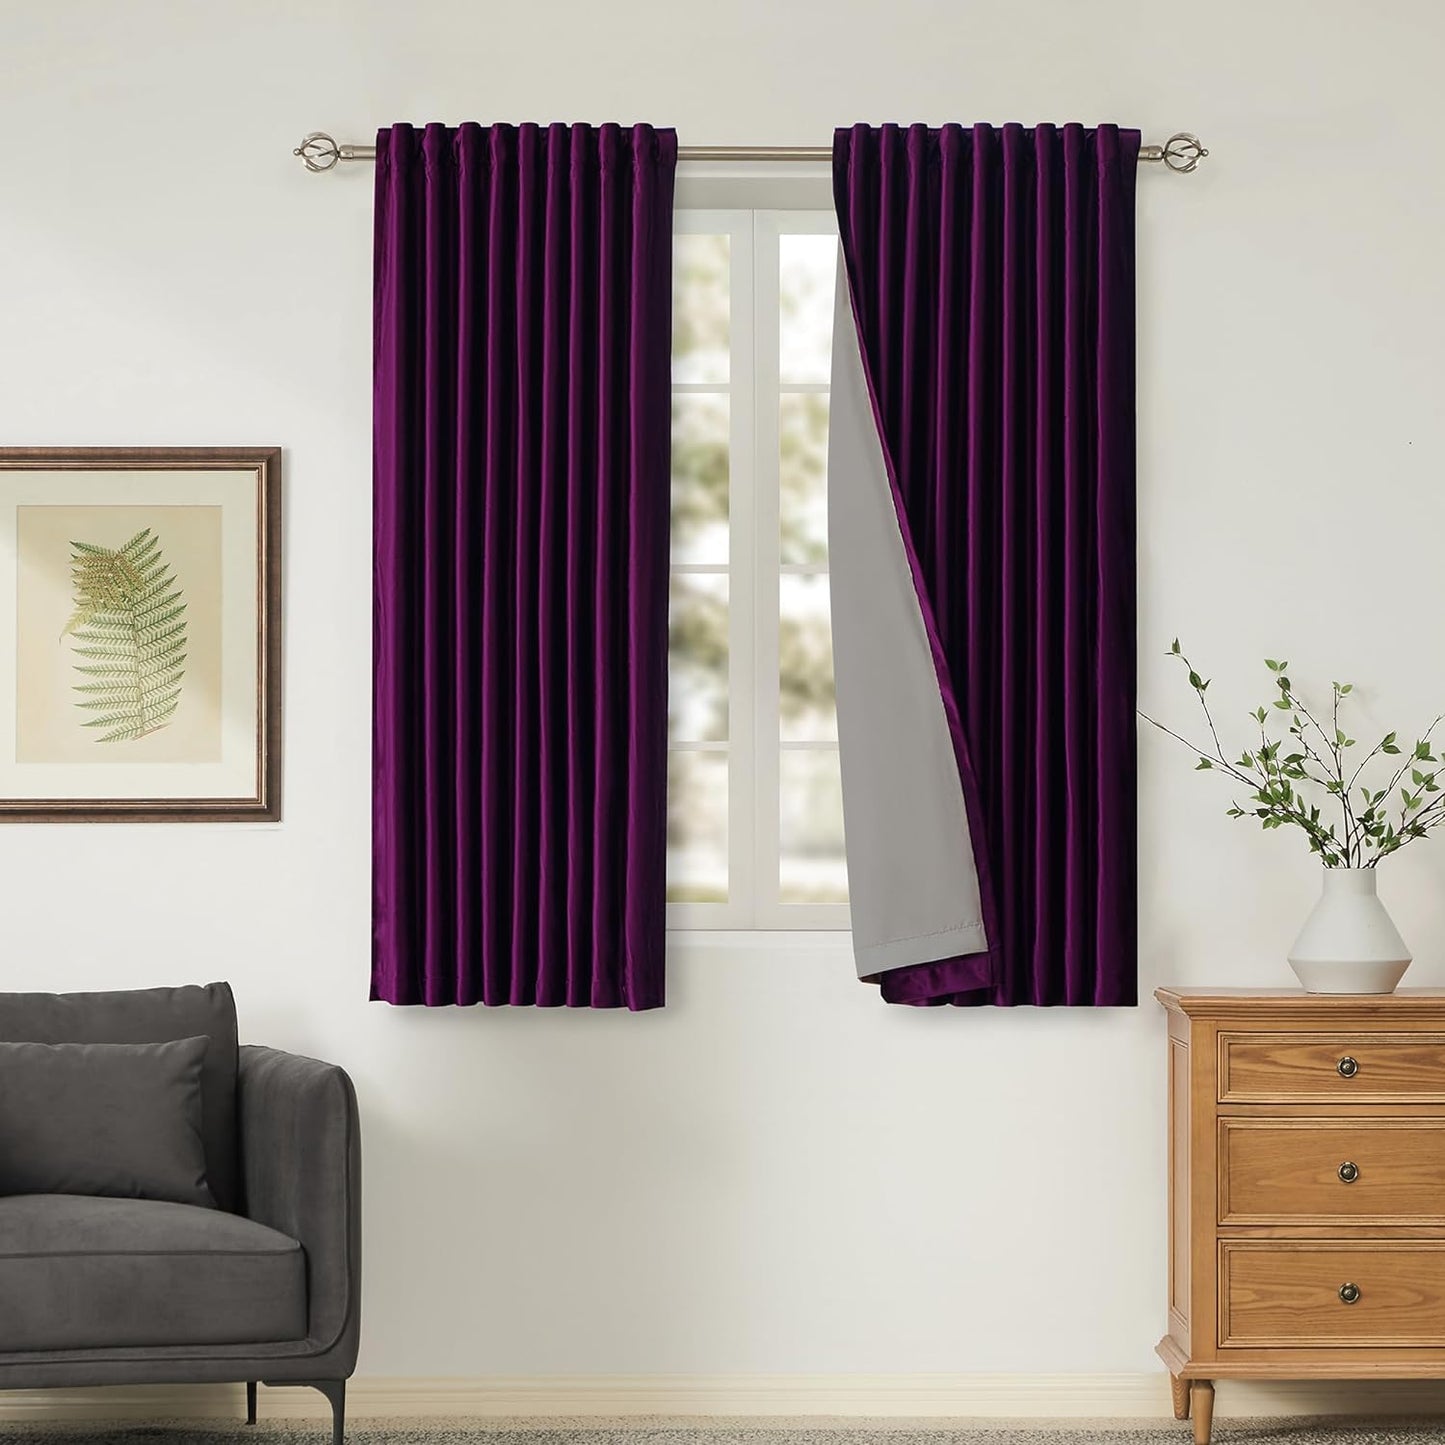 100% Blackout Ivory off White Velvet Curtains 108 Inch Long for Living Room,Set of 2 Panels Liner Rod Pocket Back Tab Thermal Window Drapes Room Darkening Heavy Decorative Curtains for Bedroom  PRIMROSE Purple 52X63 Inches 